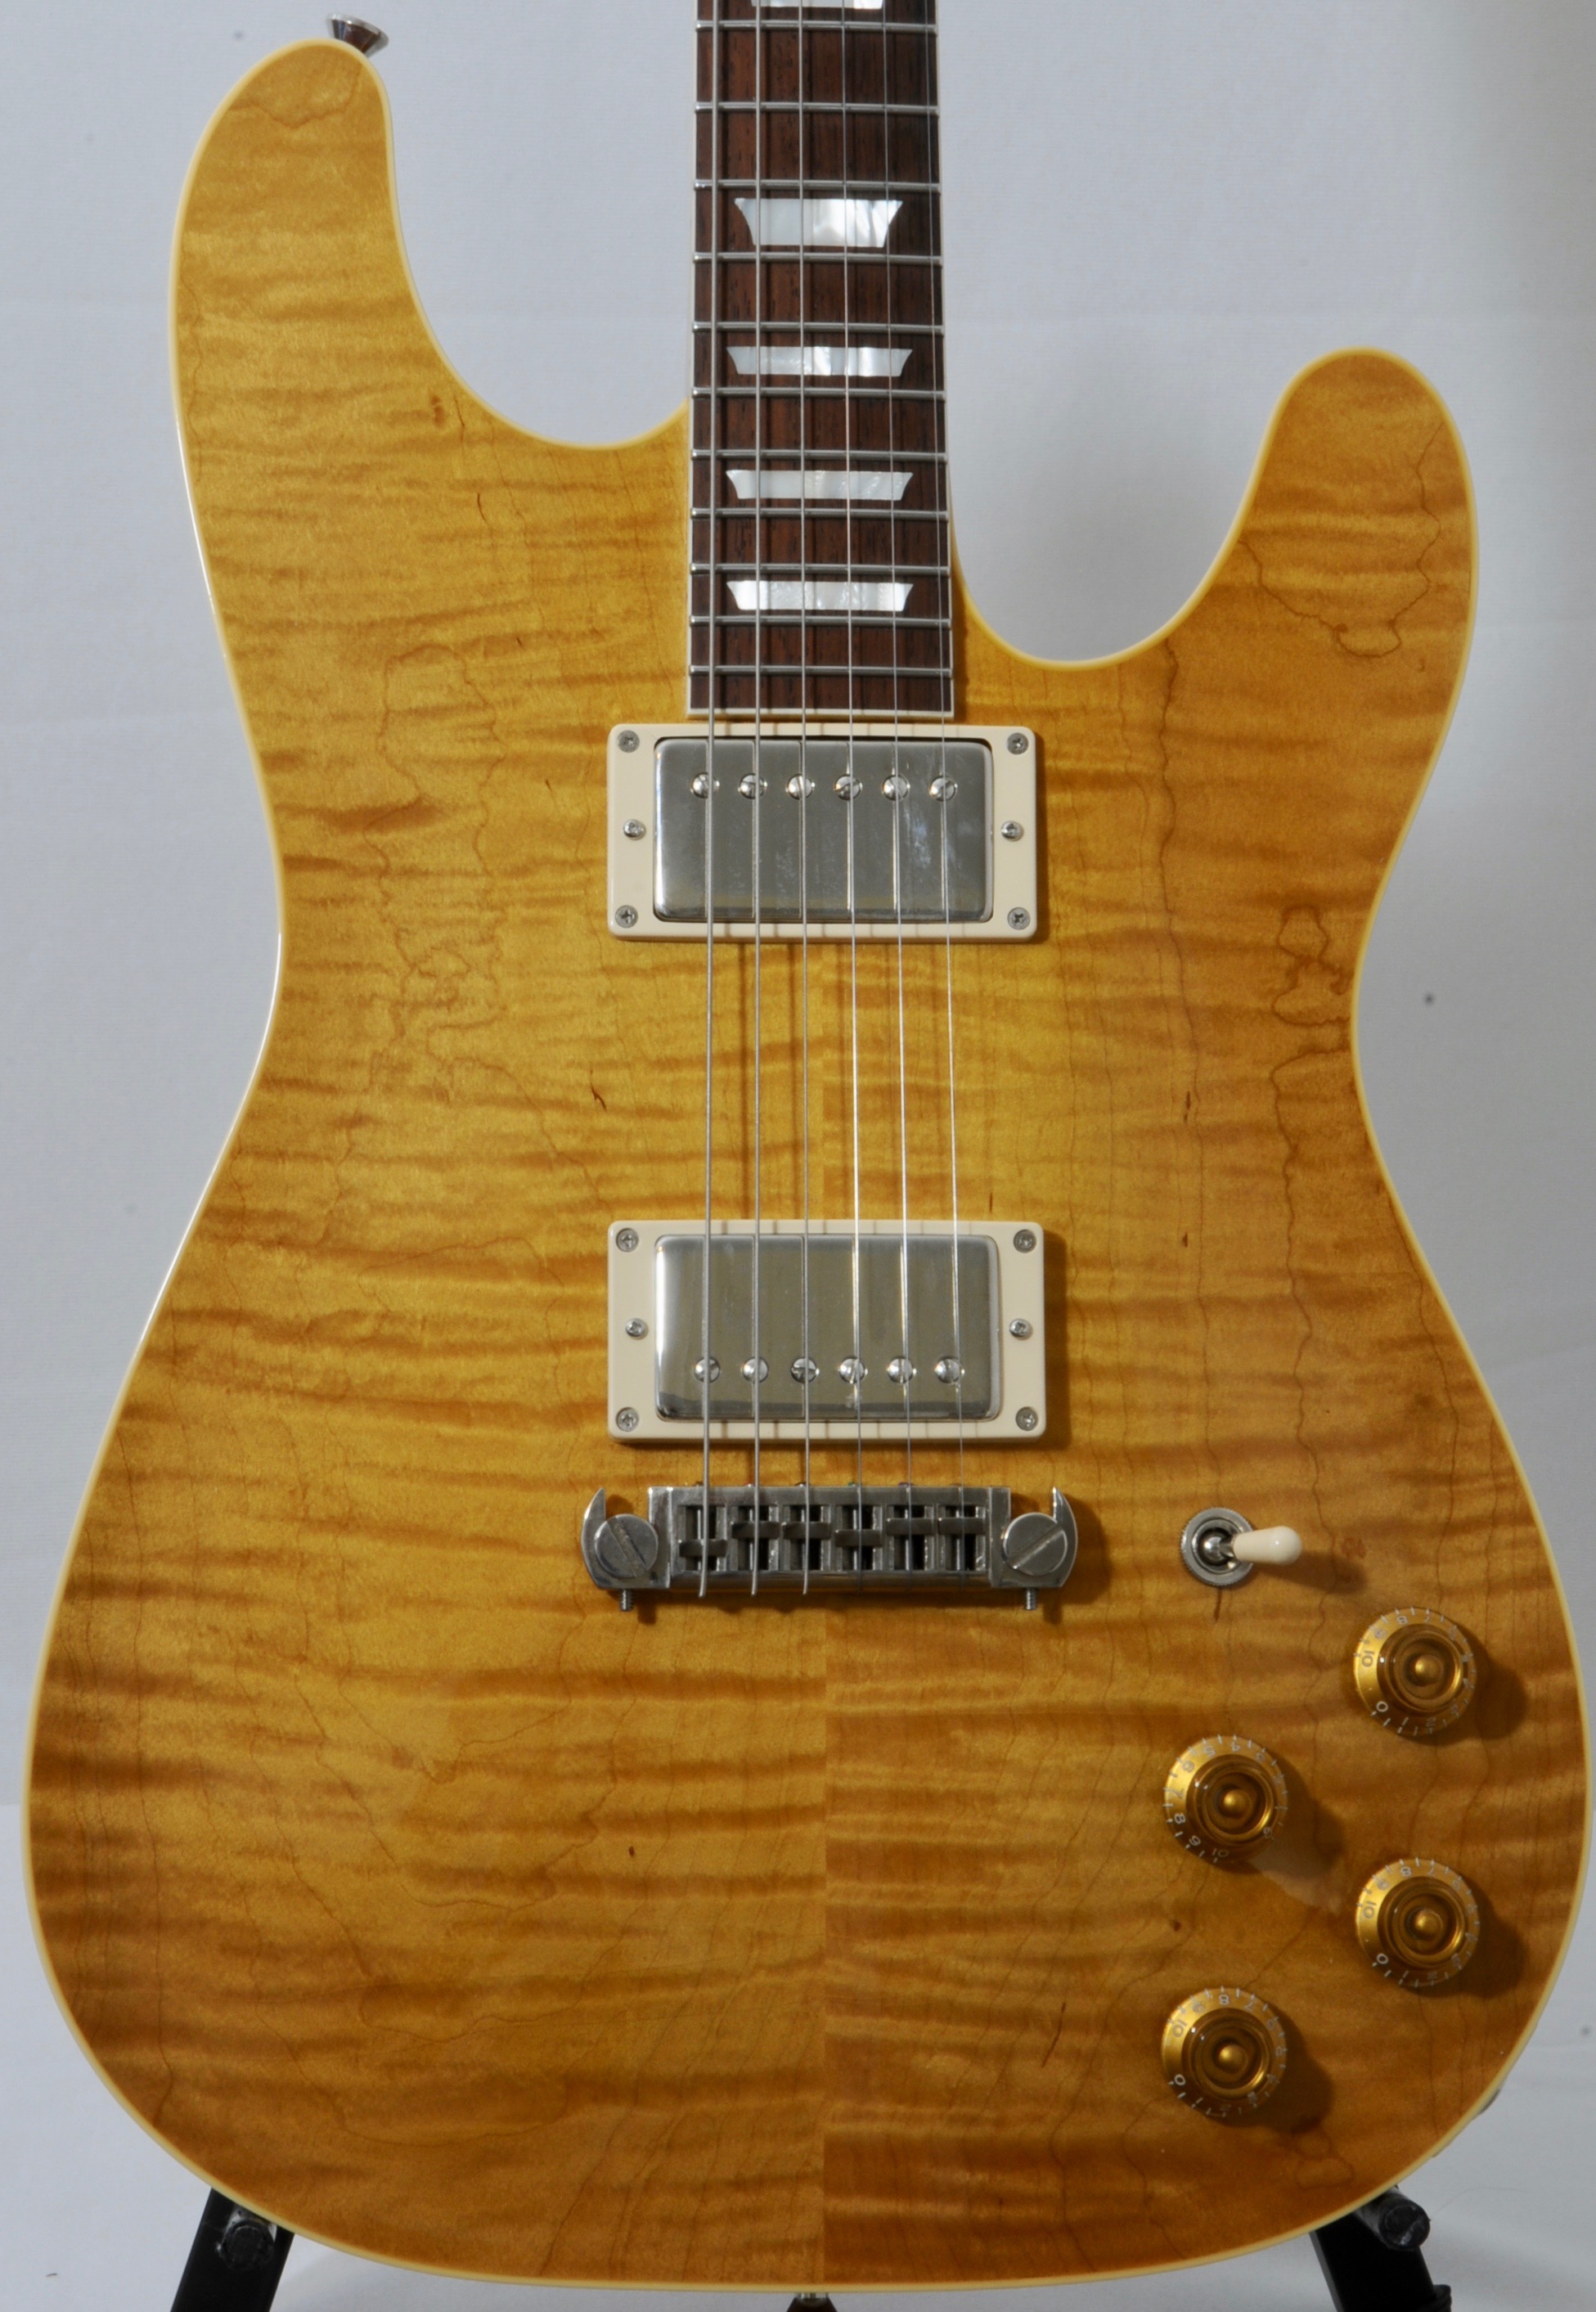 2015 Probett Rocket – Think the LP you wish FENDER (or Gibson Made)